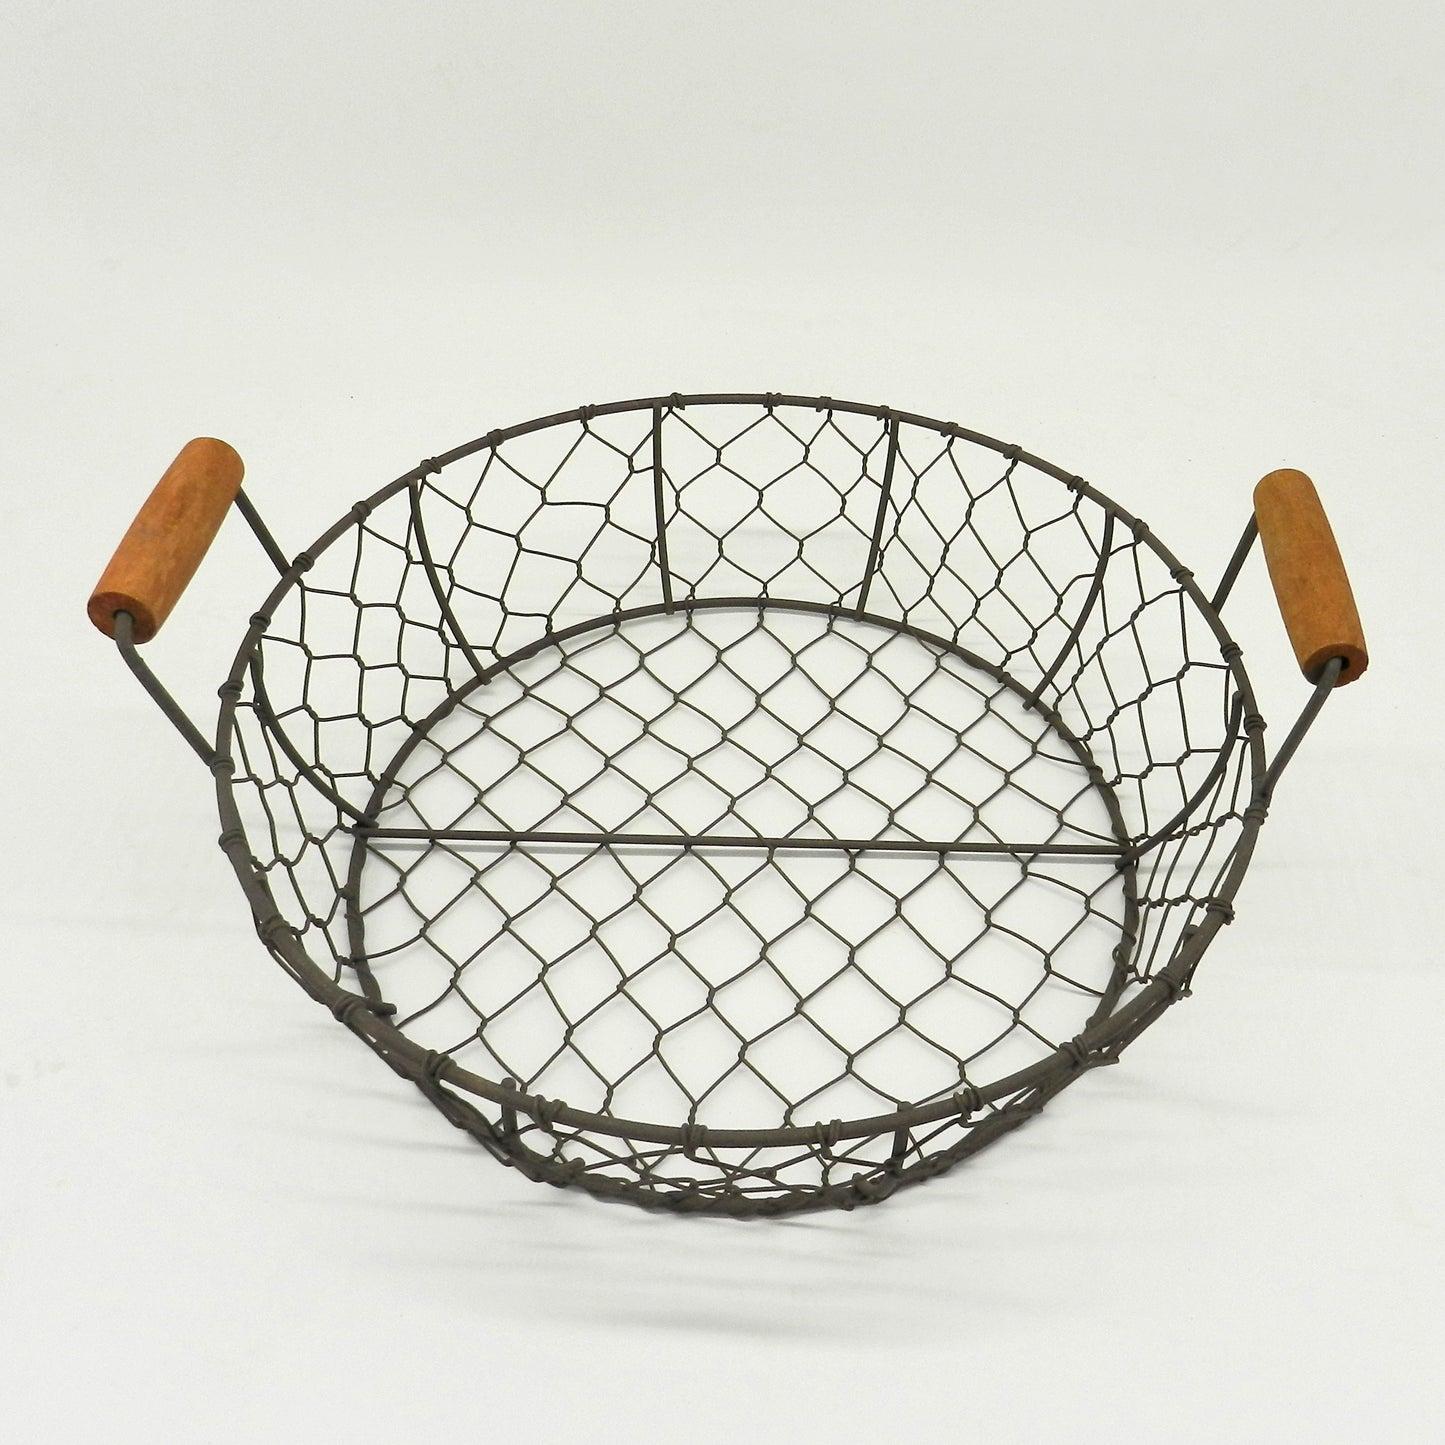 CVHOMEDECO. Round Metal Wire Fruit tray Chicken Wire Tray with Wooden Handle Country Vintage Style Serving Tray. Rusty, Dia. 11.75 X 3.13 Inch